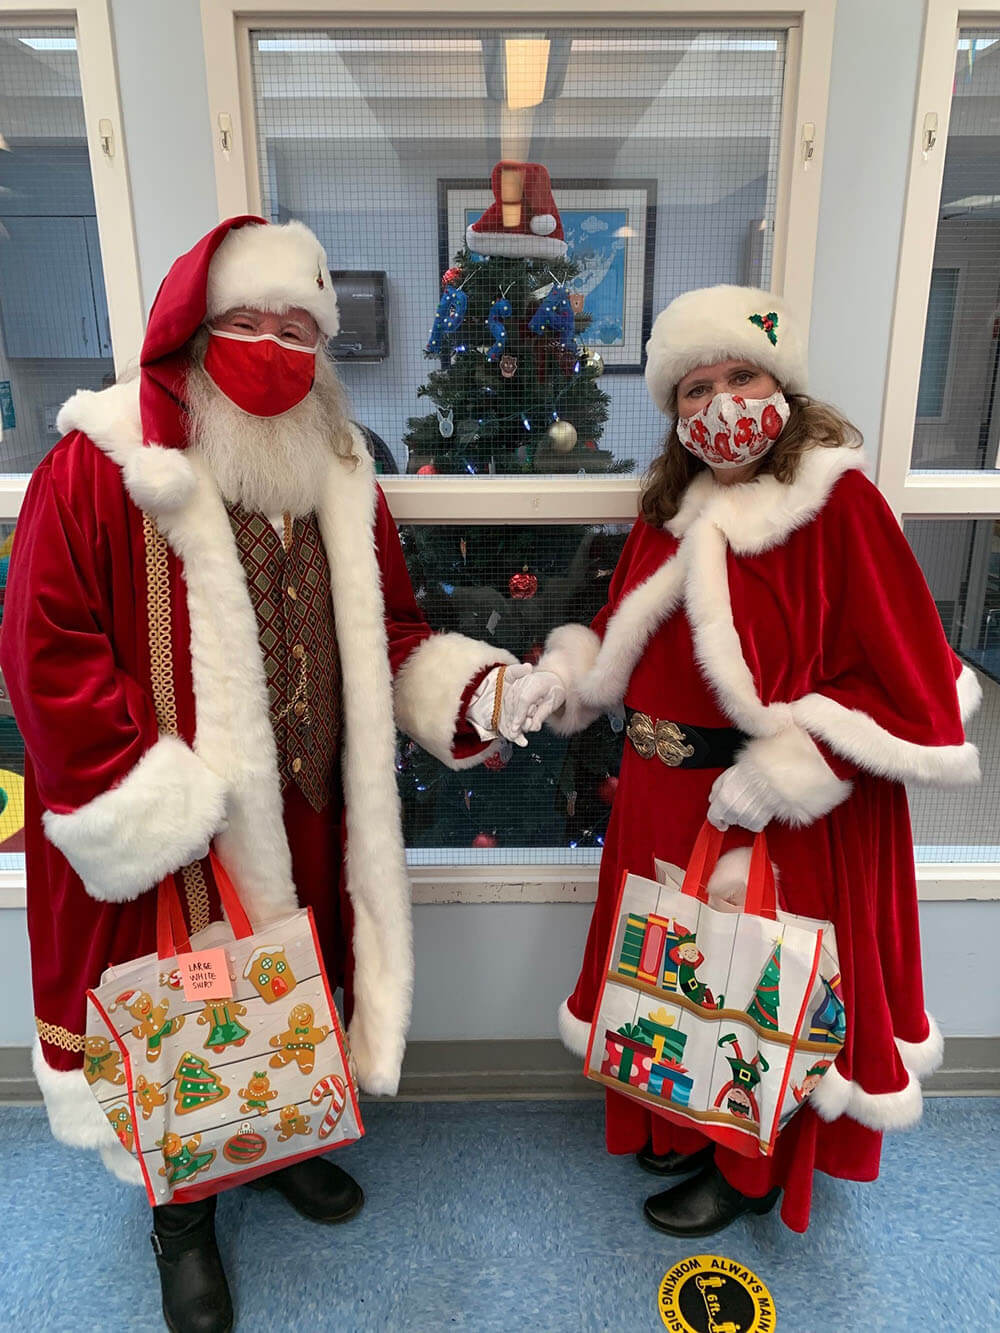 Santa and Mrs. Claus each holding a Christmas gift bag